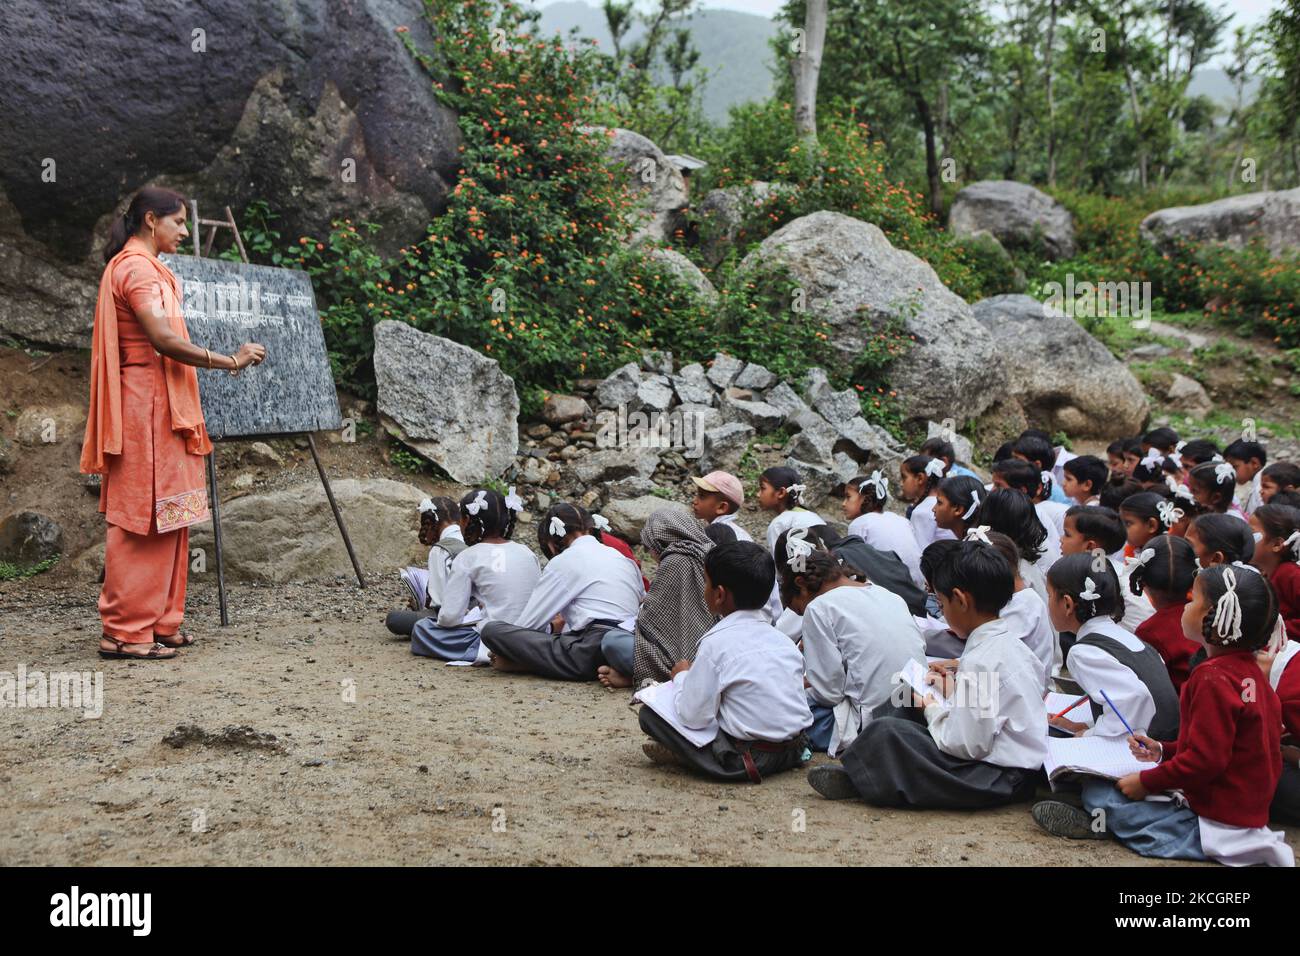 Primary students learn Hindi at an outdoor classroom in the small village of Sansal in Himachal Pradesh, India, on July 05, 2010. (Photo by Creative Touch Imaging Ltd./NurPhoto) Stock Photo